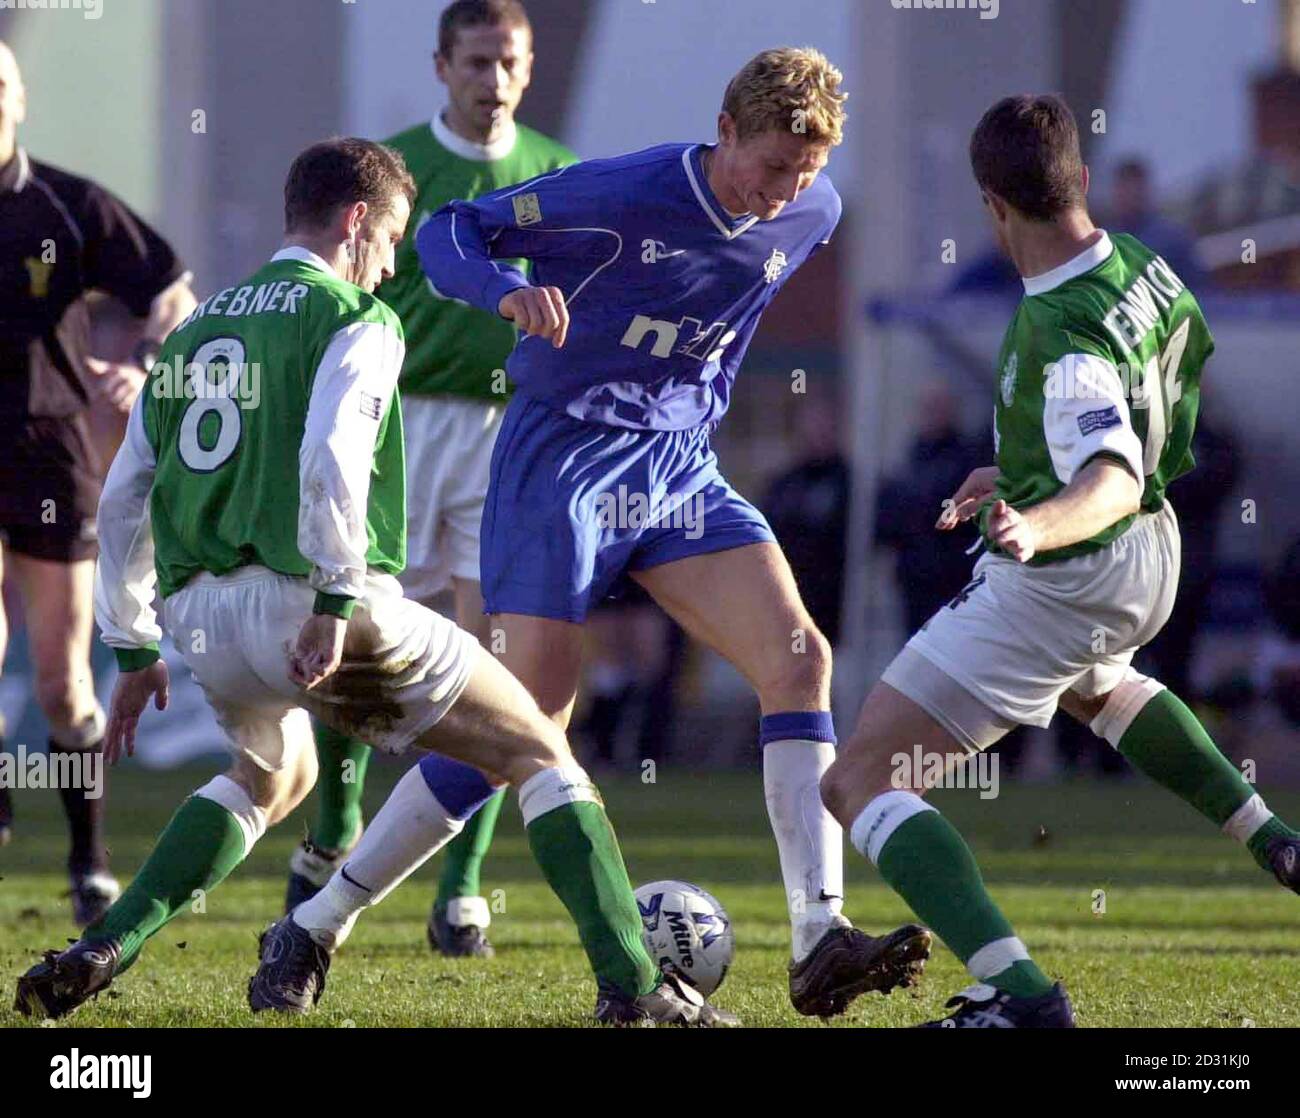 Rangers Tore Andre Flo (centre) holds off Hibernian's Grant Brebner (left) and Paul Fenwick during the Bank of Scotland Premier game at Easter Road, Edinburgh. Stock Photo